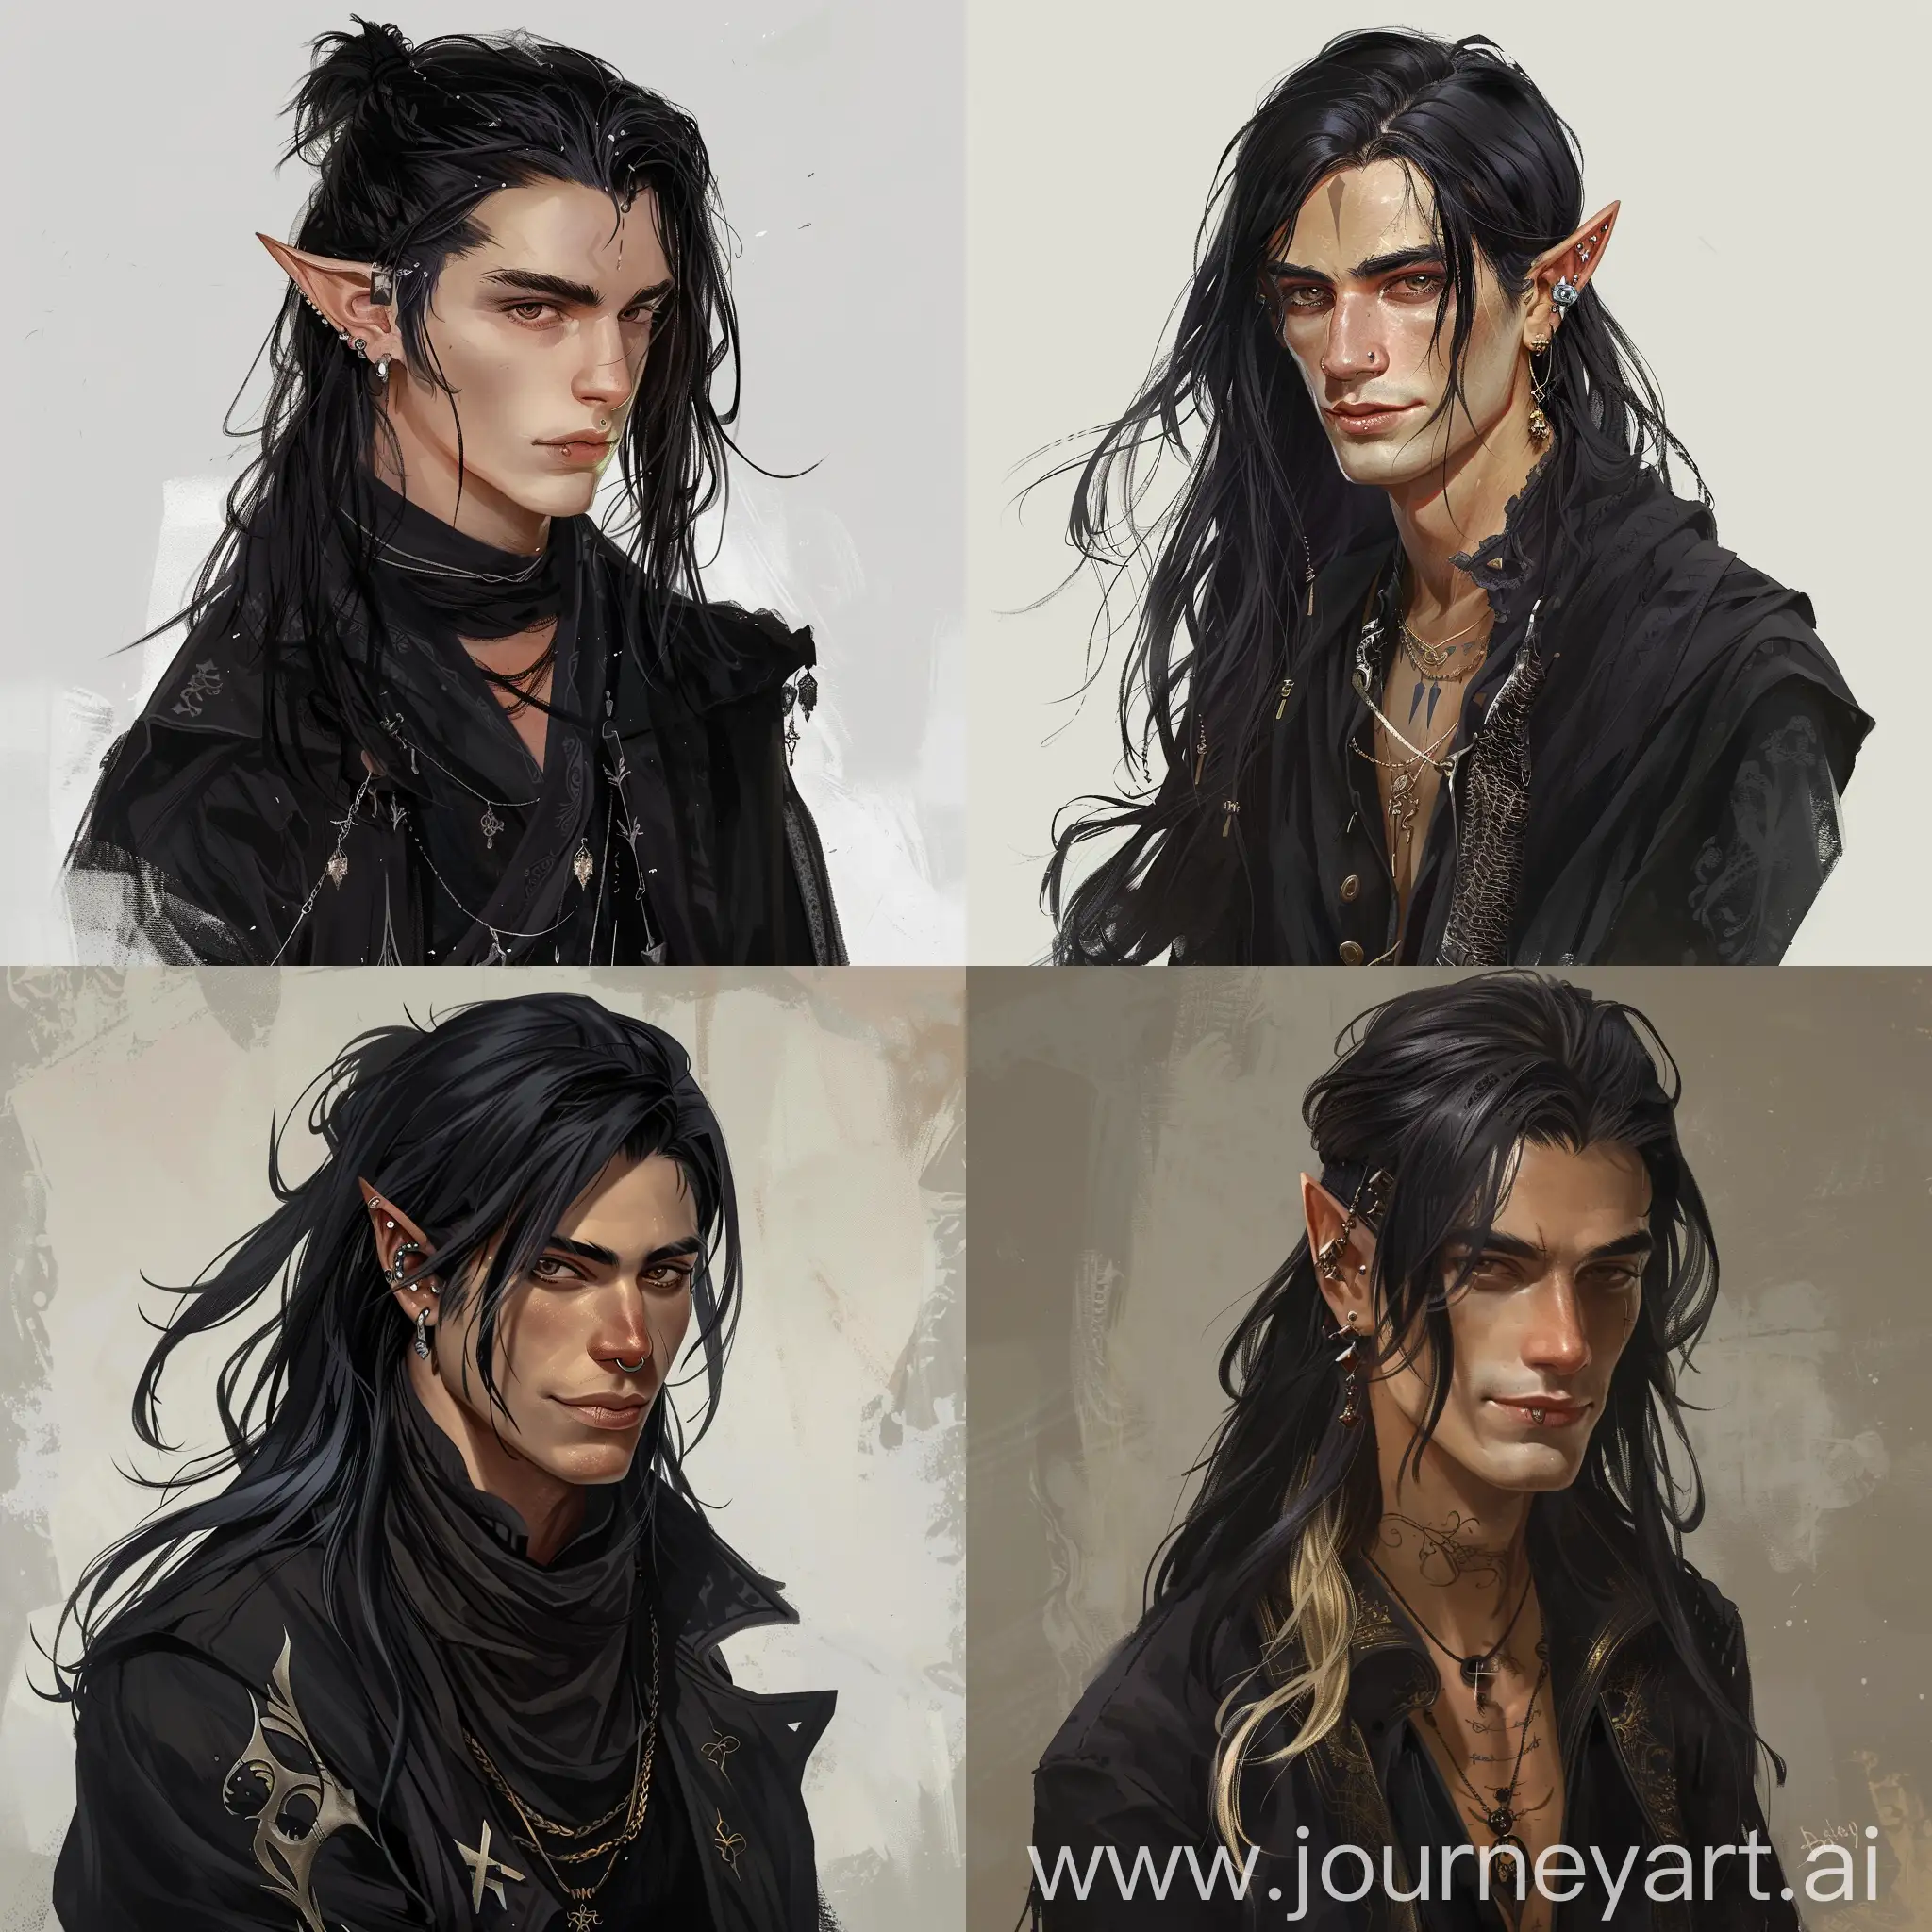 : A man. Lightfoot Halfling Rogue. Assassin/Spy predominantly black clothing and not cute but with a really charismatic/attractive aura. Medium-long black hair with dyed light-platinum ends. With cool piercings and funny looks. Fantasy Art Style